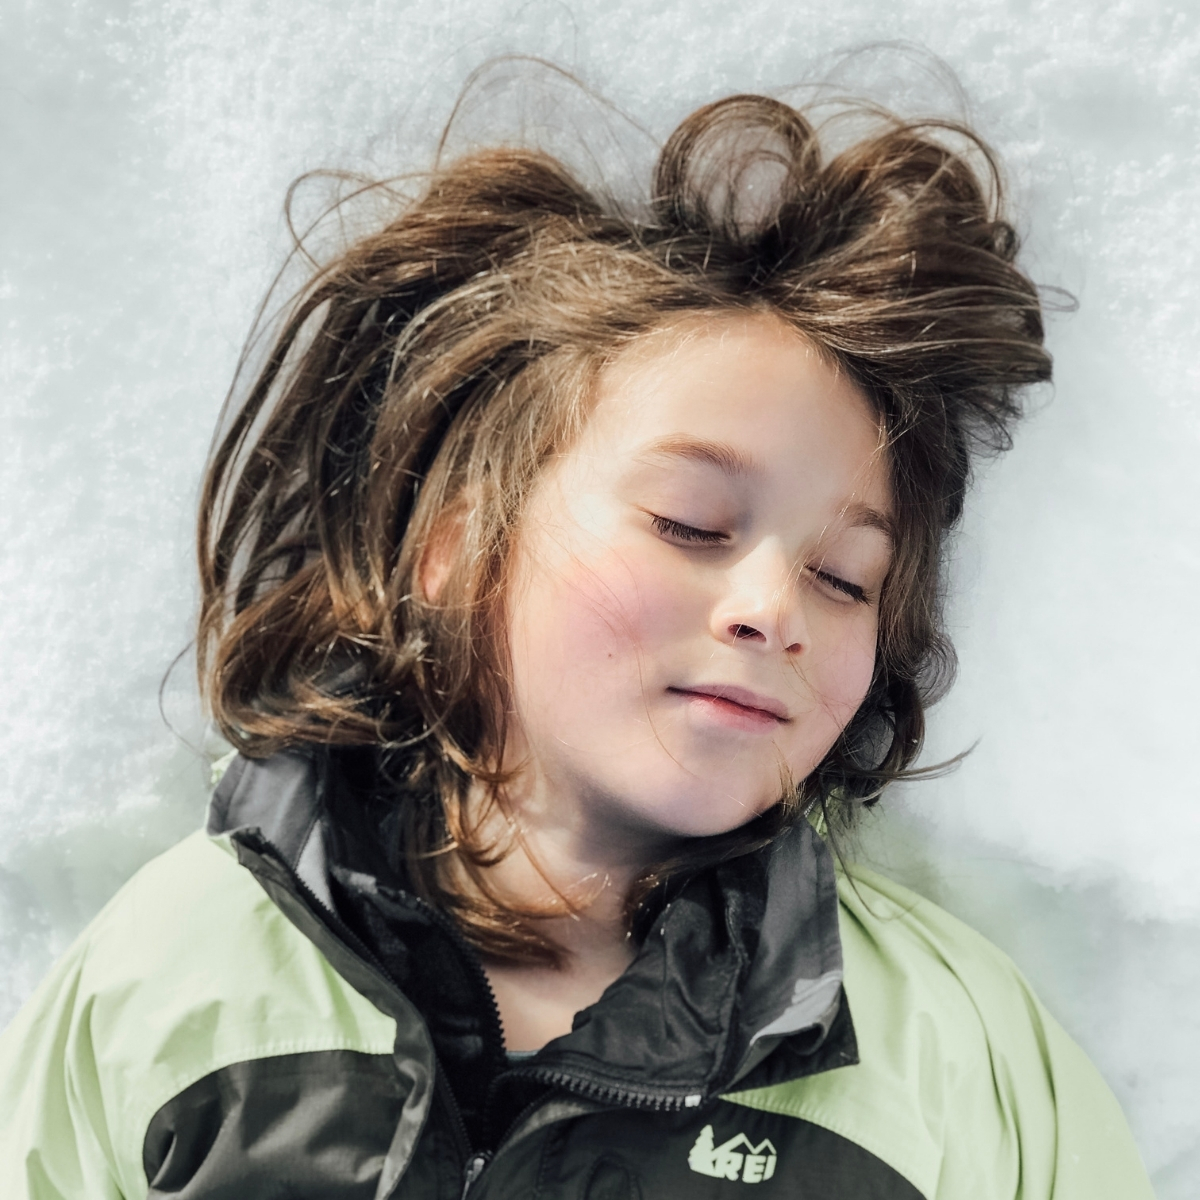 wildschooling boy lays blissfully in the snow in his winter gear on a nature adventure